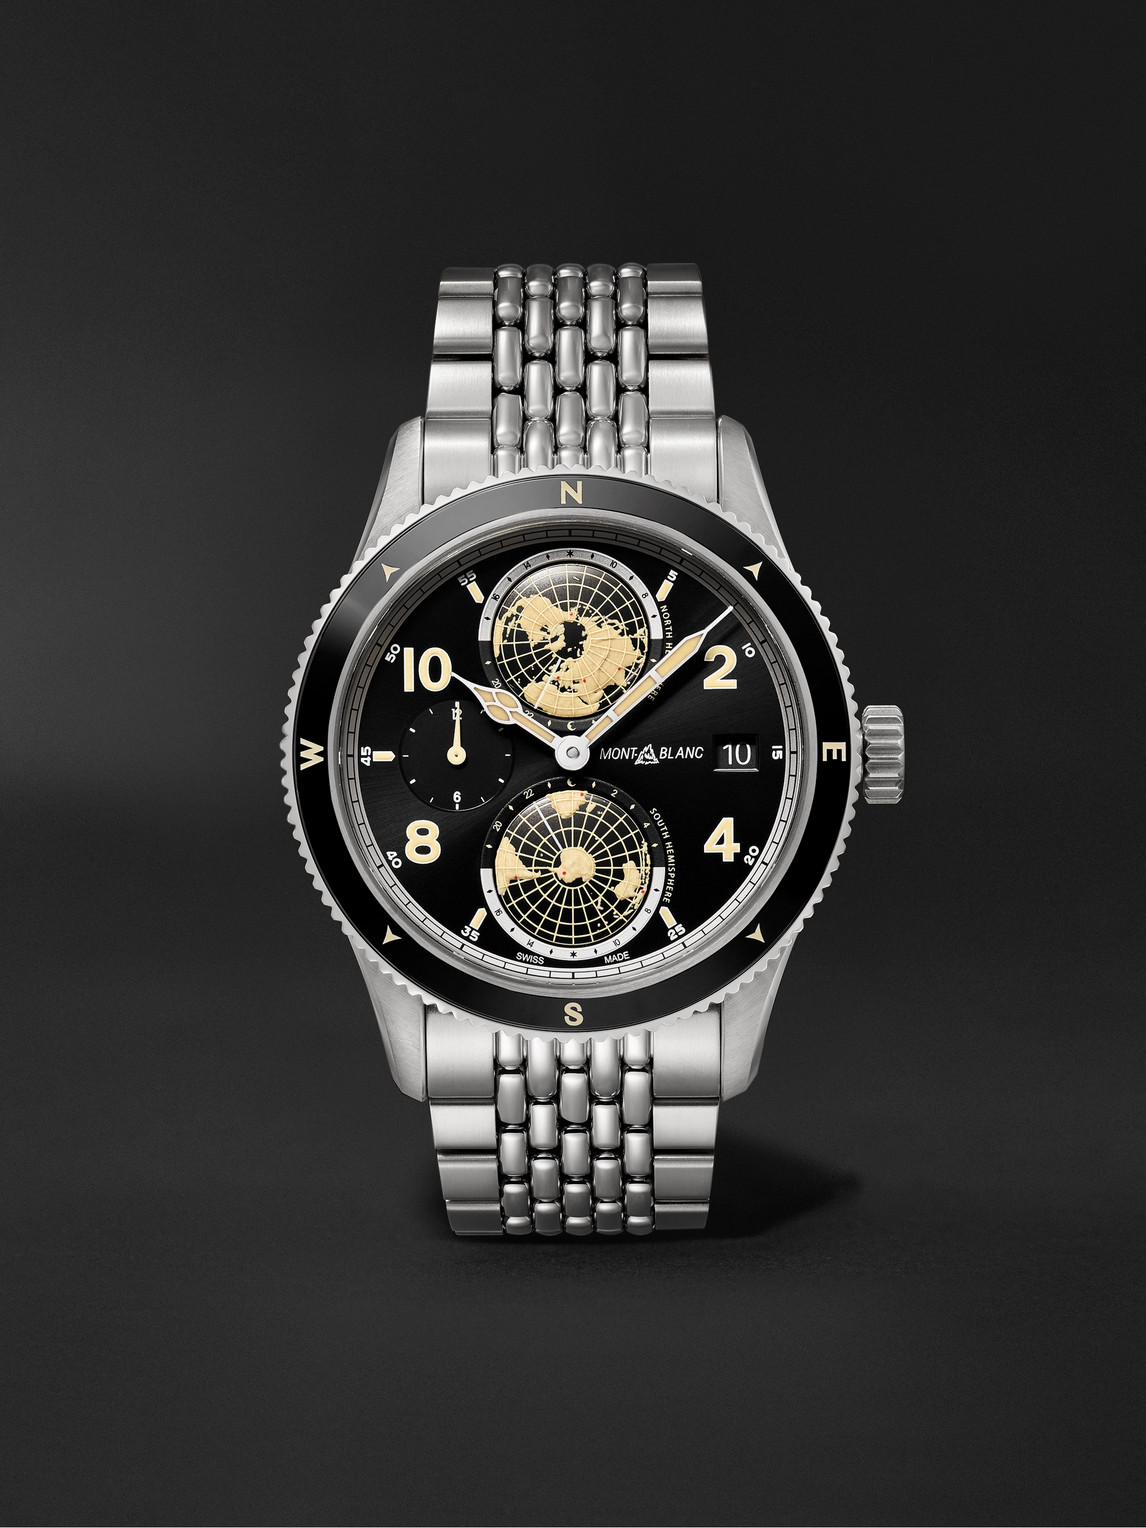 Montblanc 1858 Geosphere Automatic 42mm Stainless Steel Watch, Ref. No. 125872 In Silver